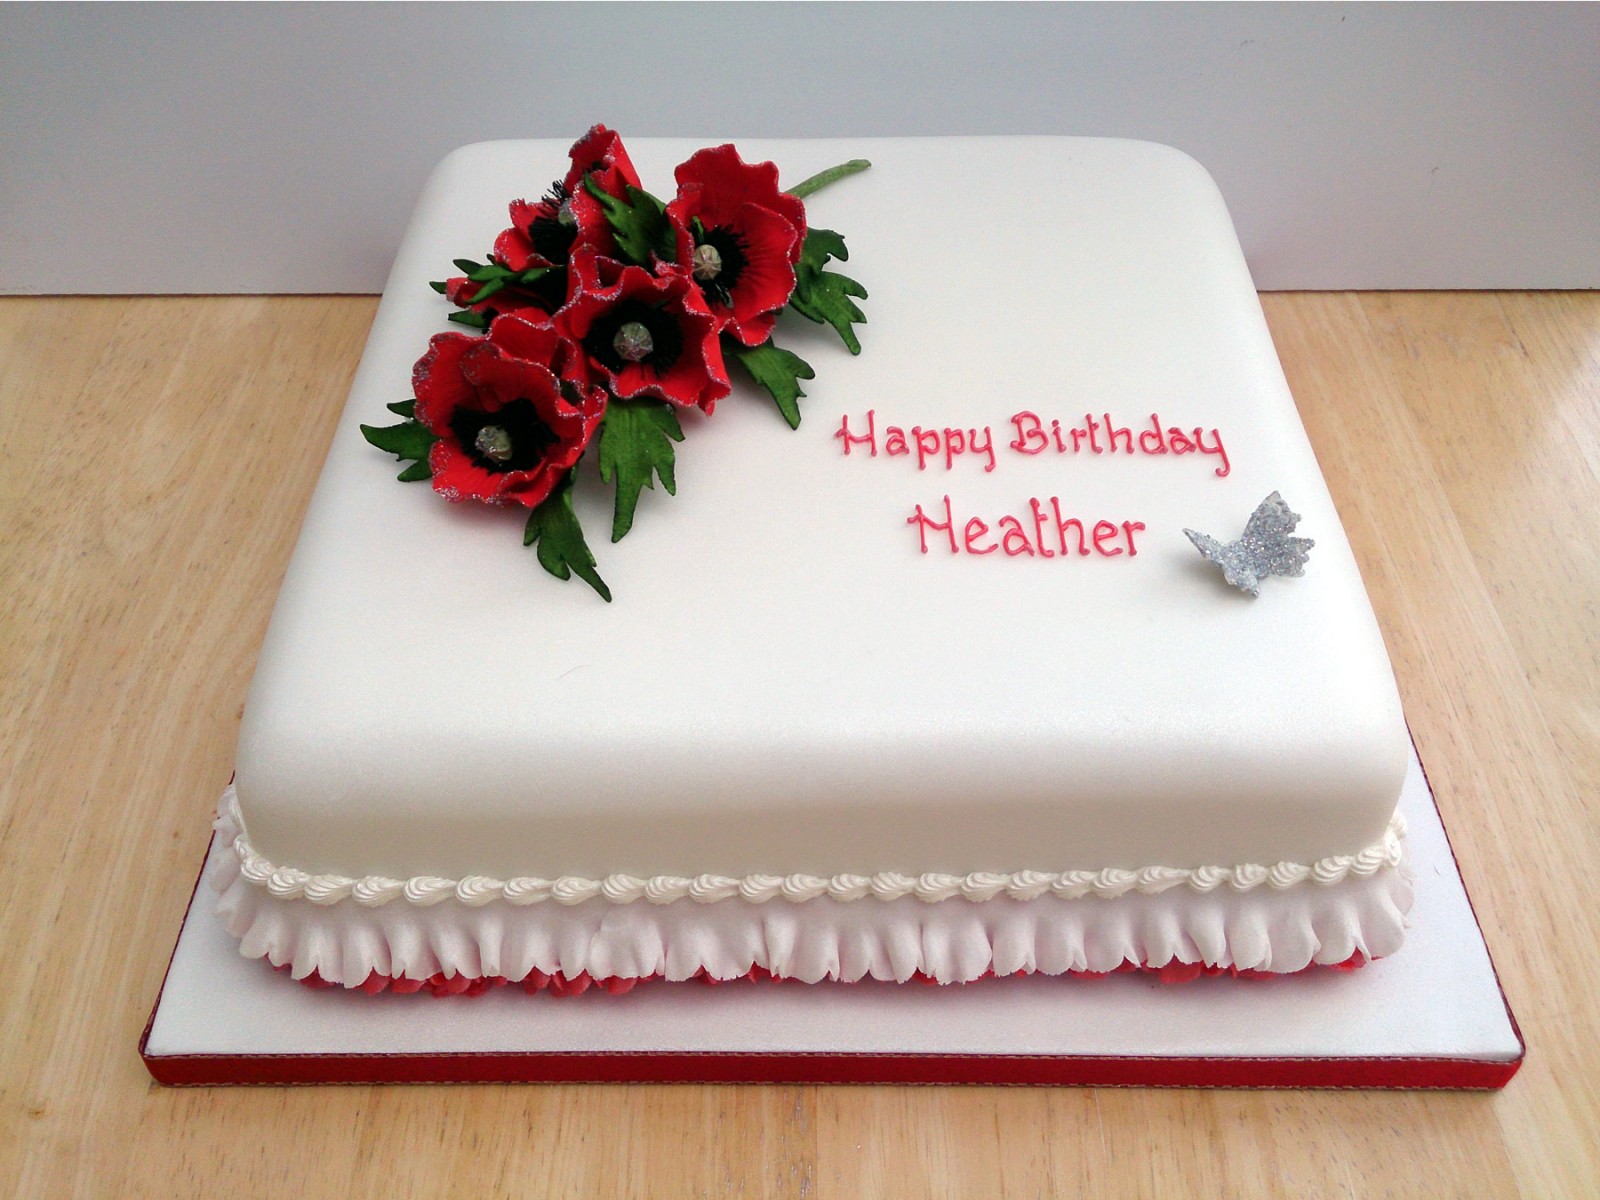 Birthday Cake with a Spray of Poppies.